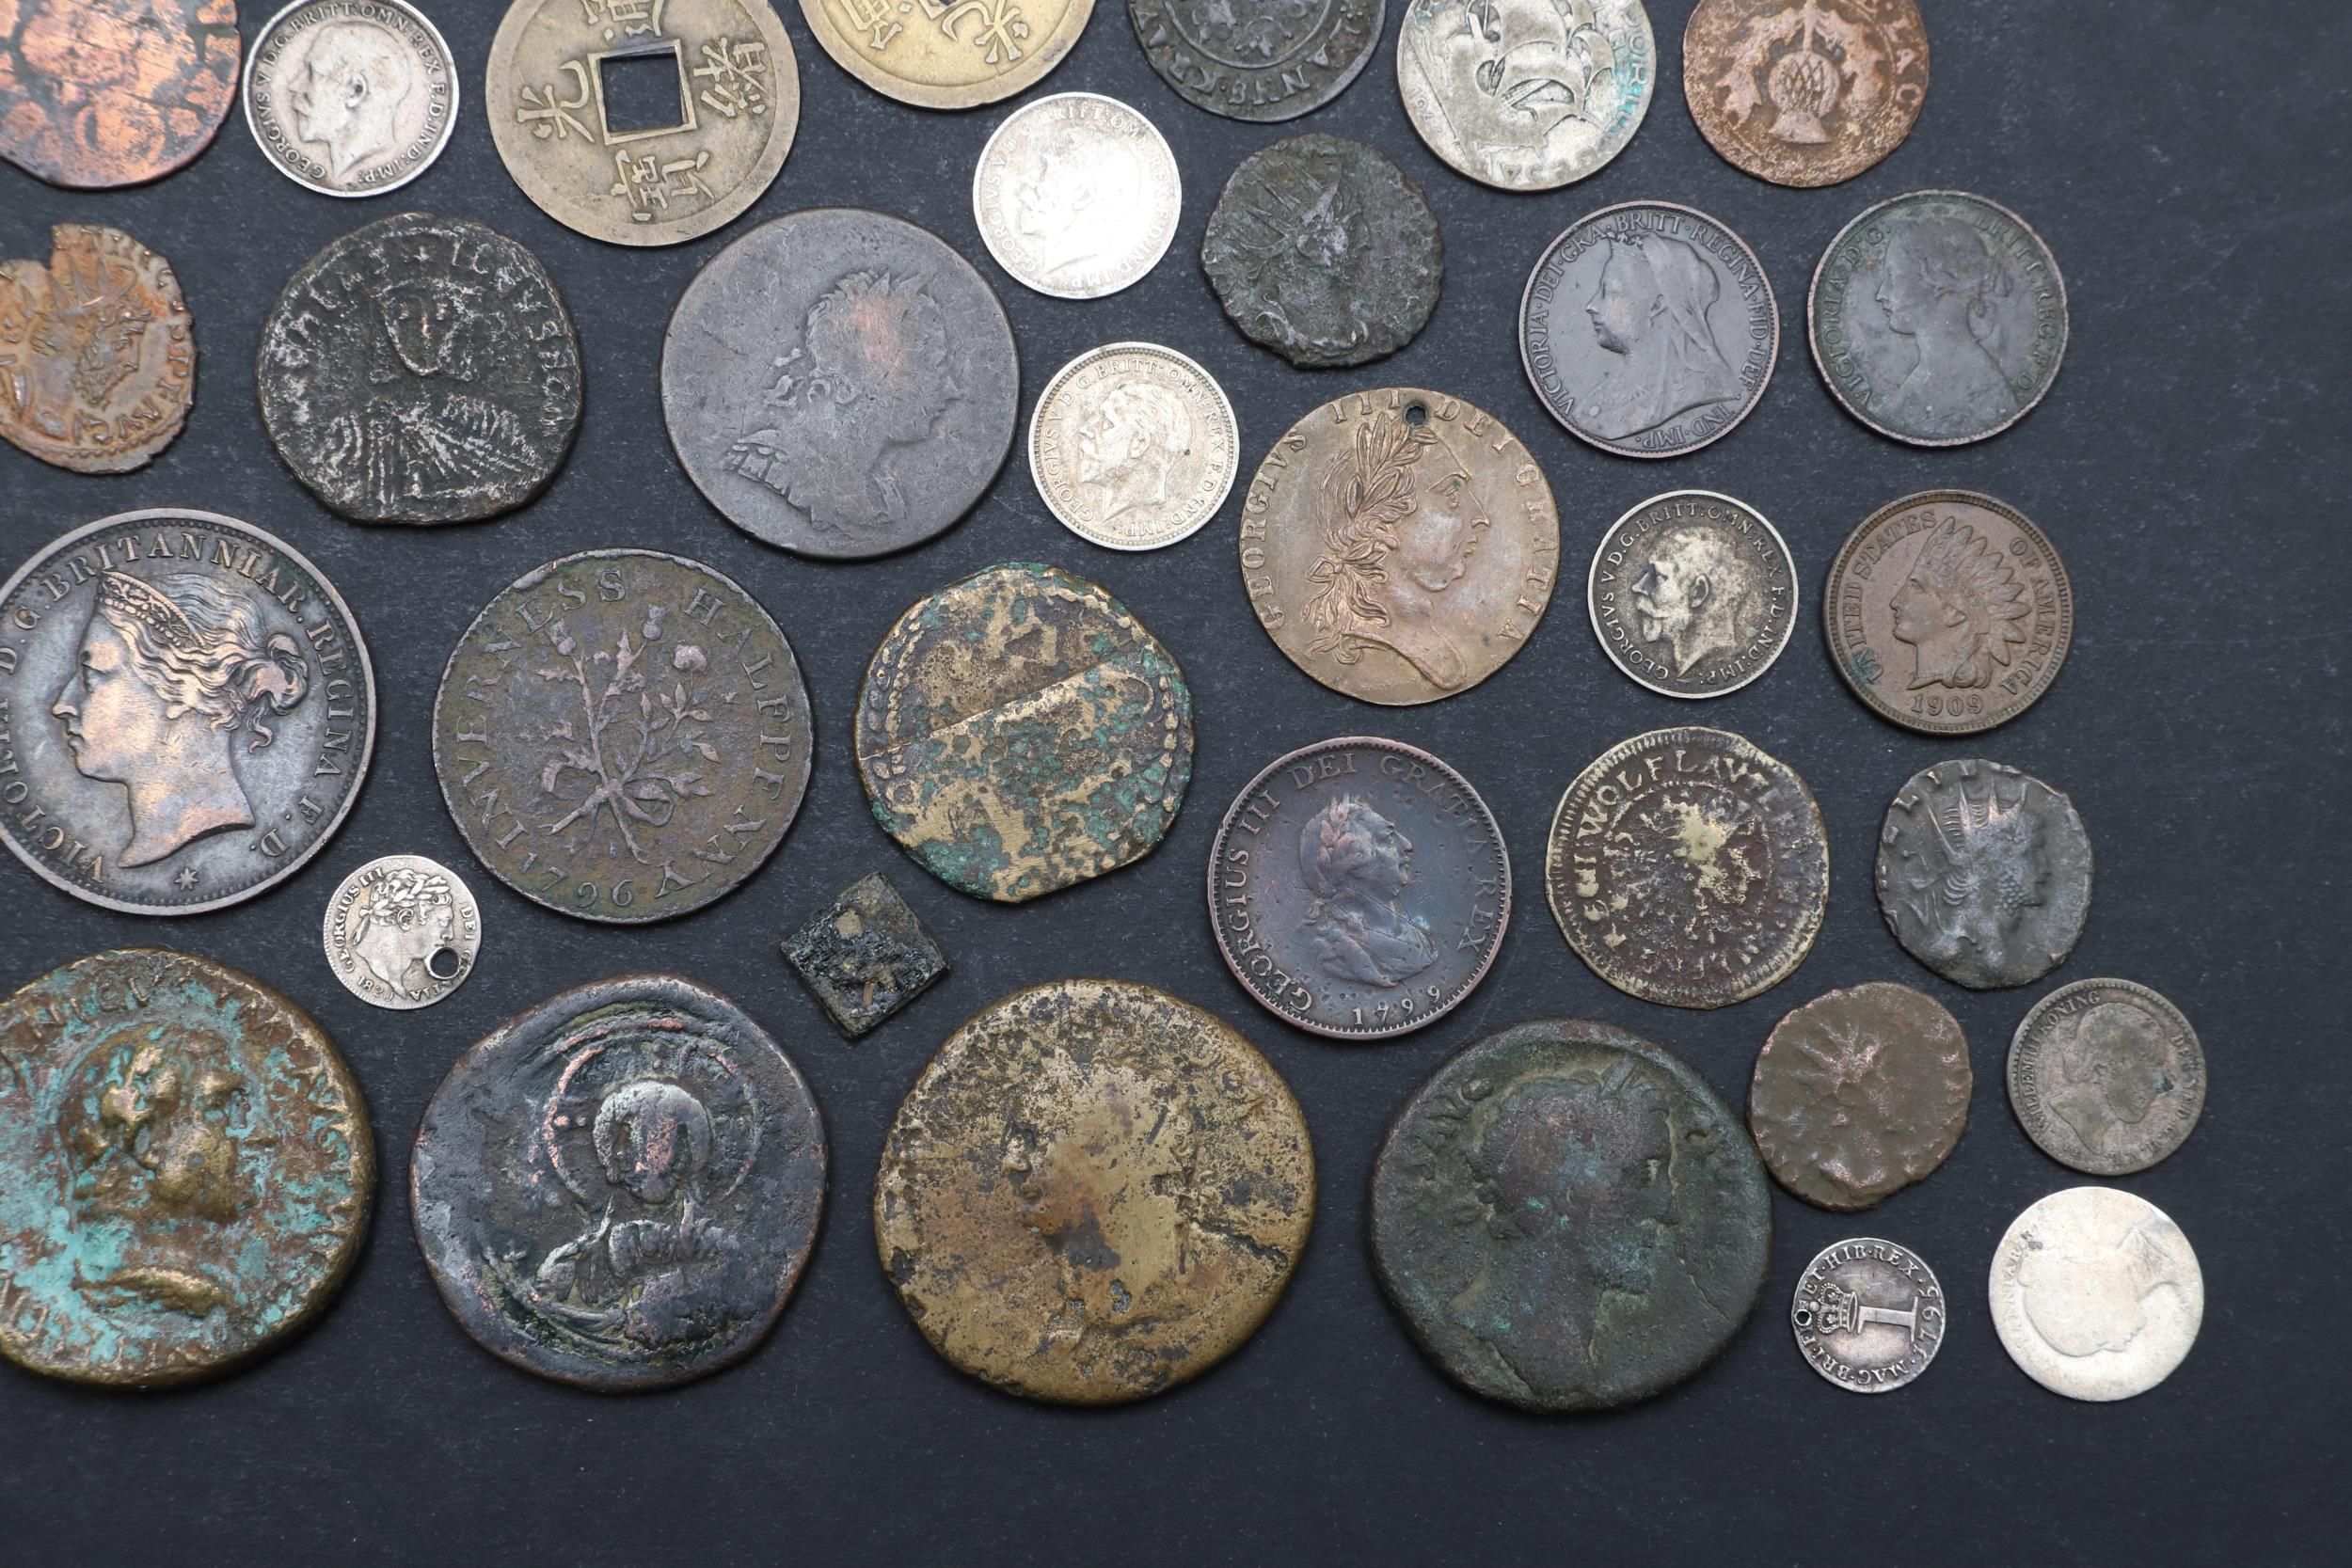 A SMALL COLLECTION OF COINS INCLUDING ROMAN, JETONS AND OTHERS. - Image 4 of 6